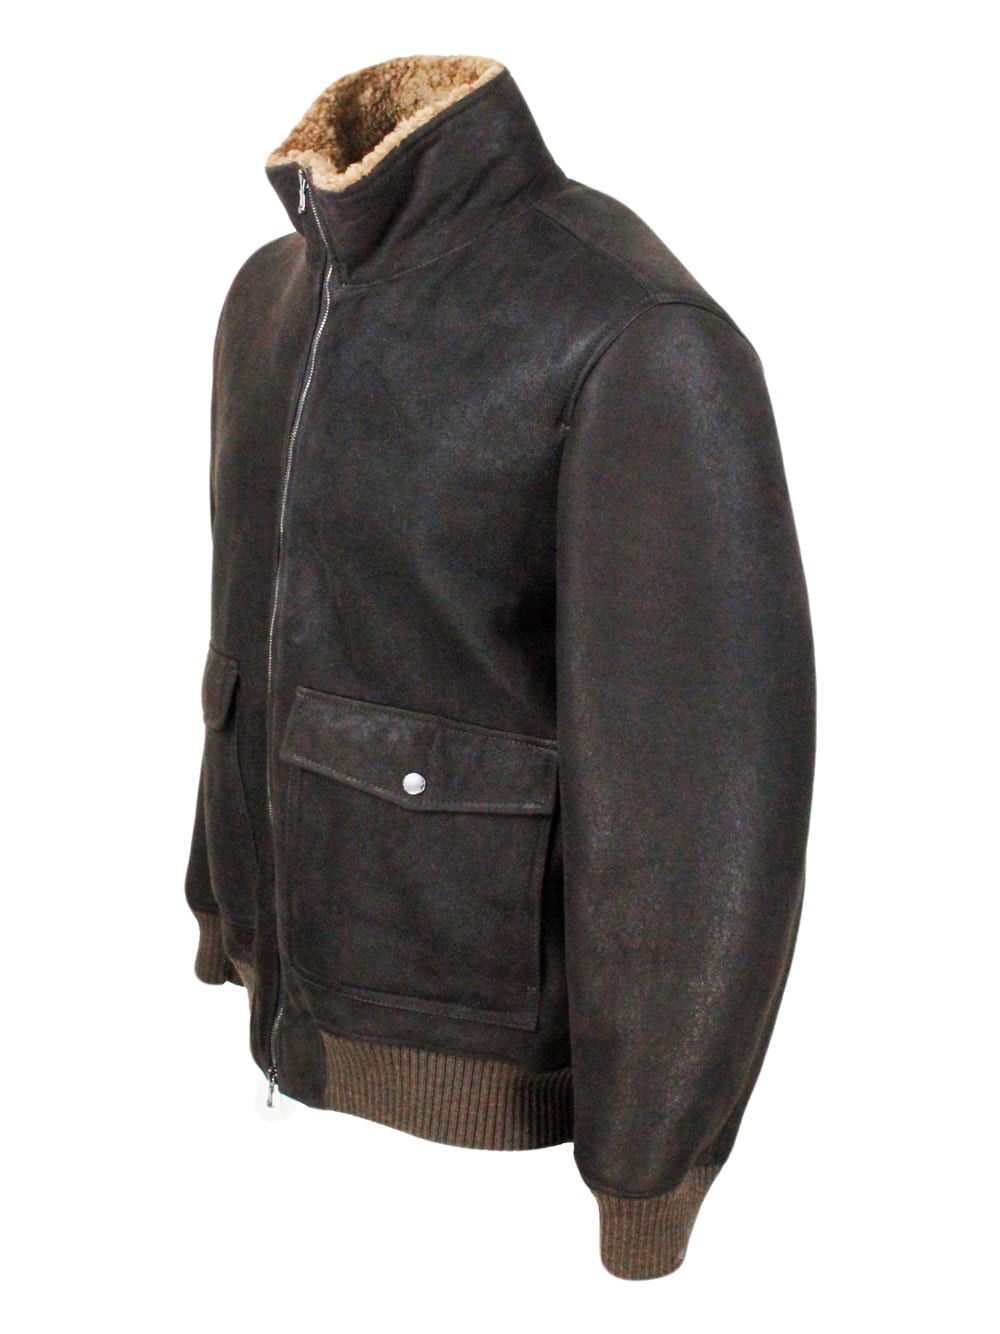 Shop Barba Napoli Bomber Jacket In Fine And Soft Shearling Sheepskin With Stretch Knit Trims And Zip Closure. Front Po In Brown